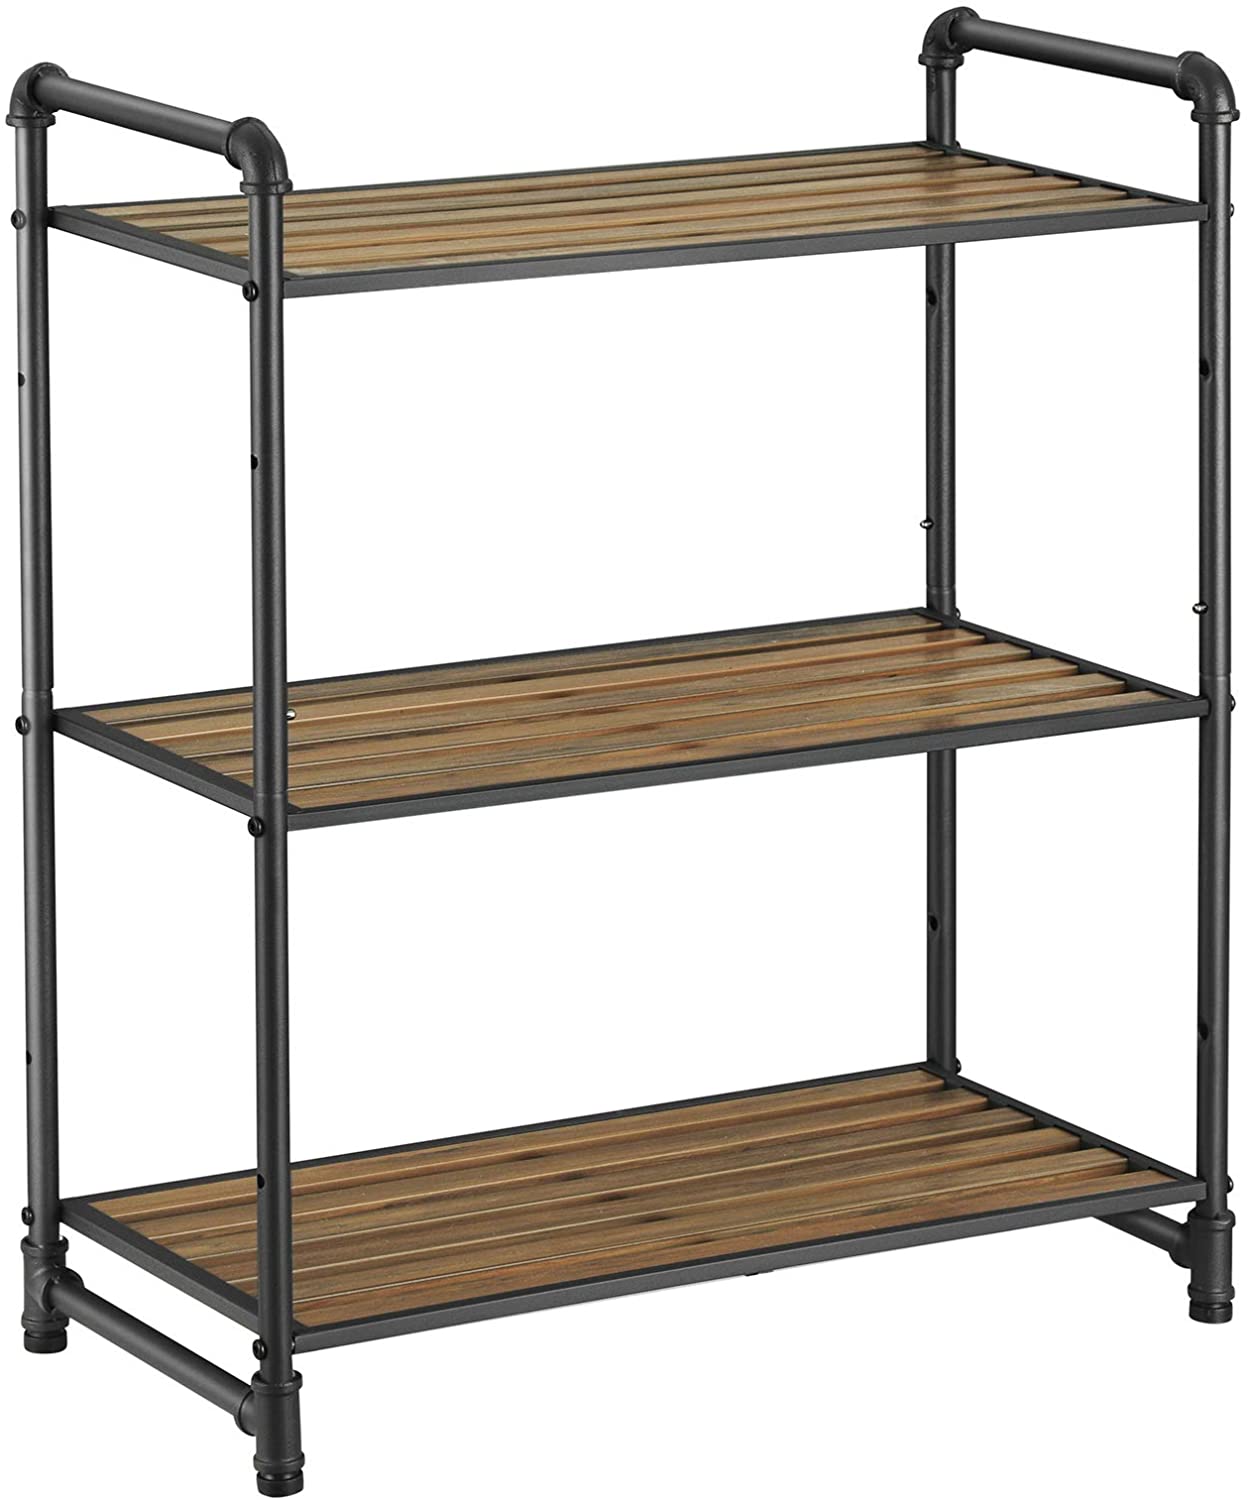 VASAGLE Industrial Style Storage Racks (3-Tier, 4-Tier, 5-Tier for Living Room, Bathroom & Kitchen) from $28.97 + Free Shipping